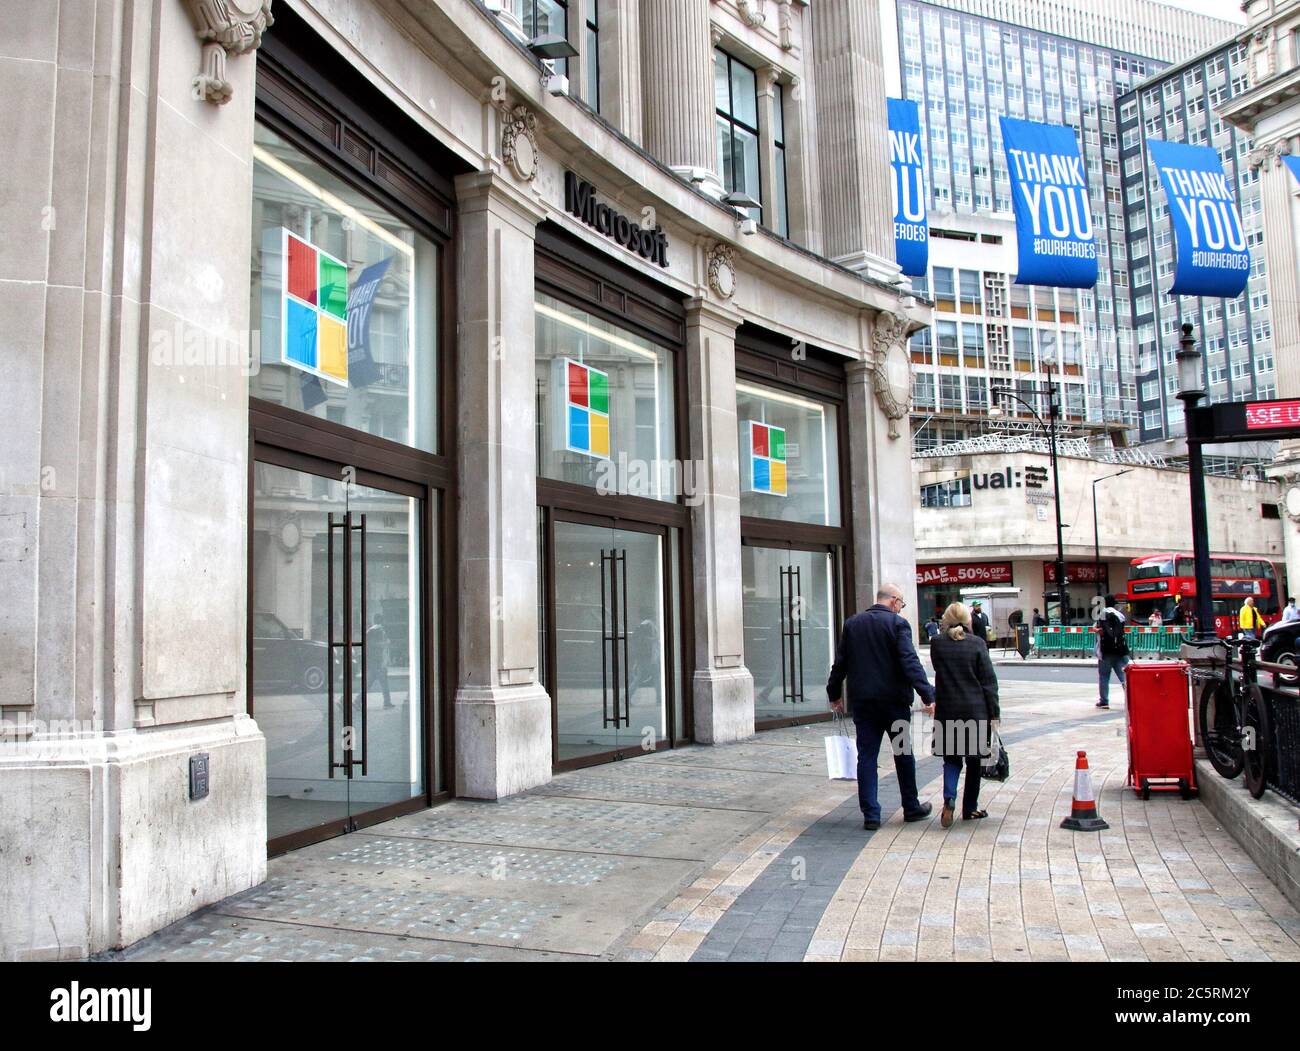 London, UK. 03rd July, 2020. A couple walk past the Microsoft store.Microsoft has said it will keep all of its retail locations closed permanently, including London's Flagship store in Oxford Circus which opened just one year ago. The company says it will reimagine some of its spaces that serve its customers, including the Microsoft Experience Centre in London. Credit: SOPA Images Limited/Alamy Live News Stock Photo